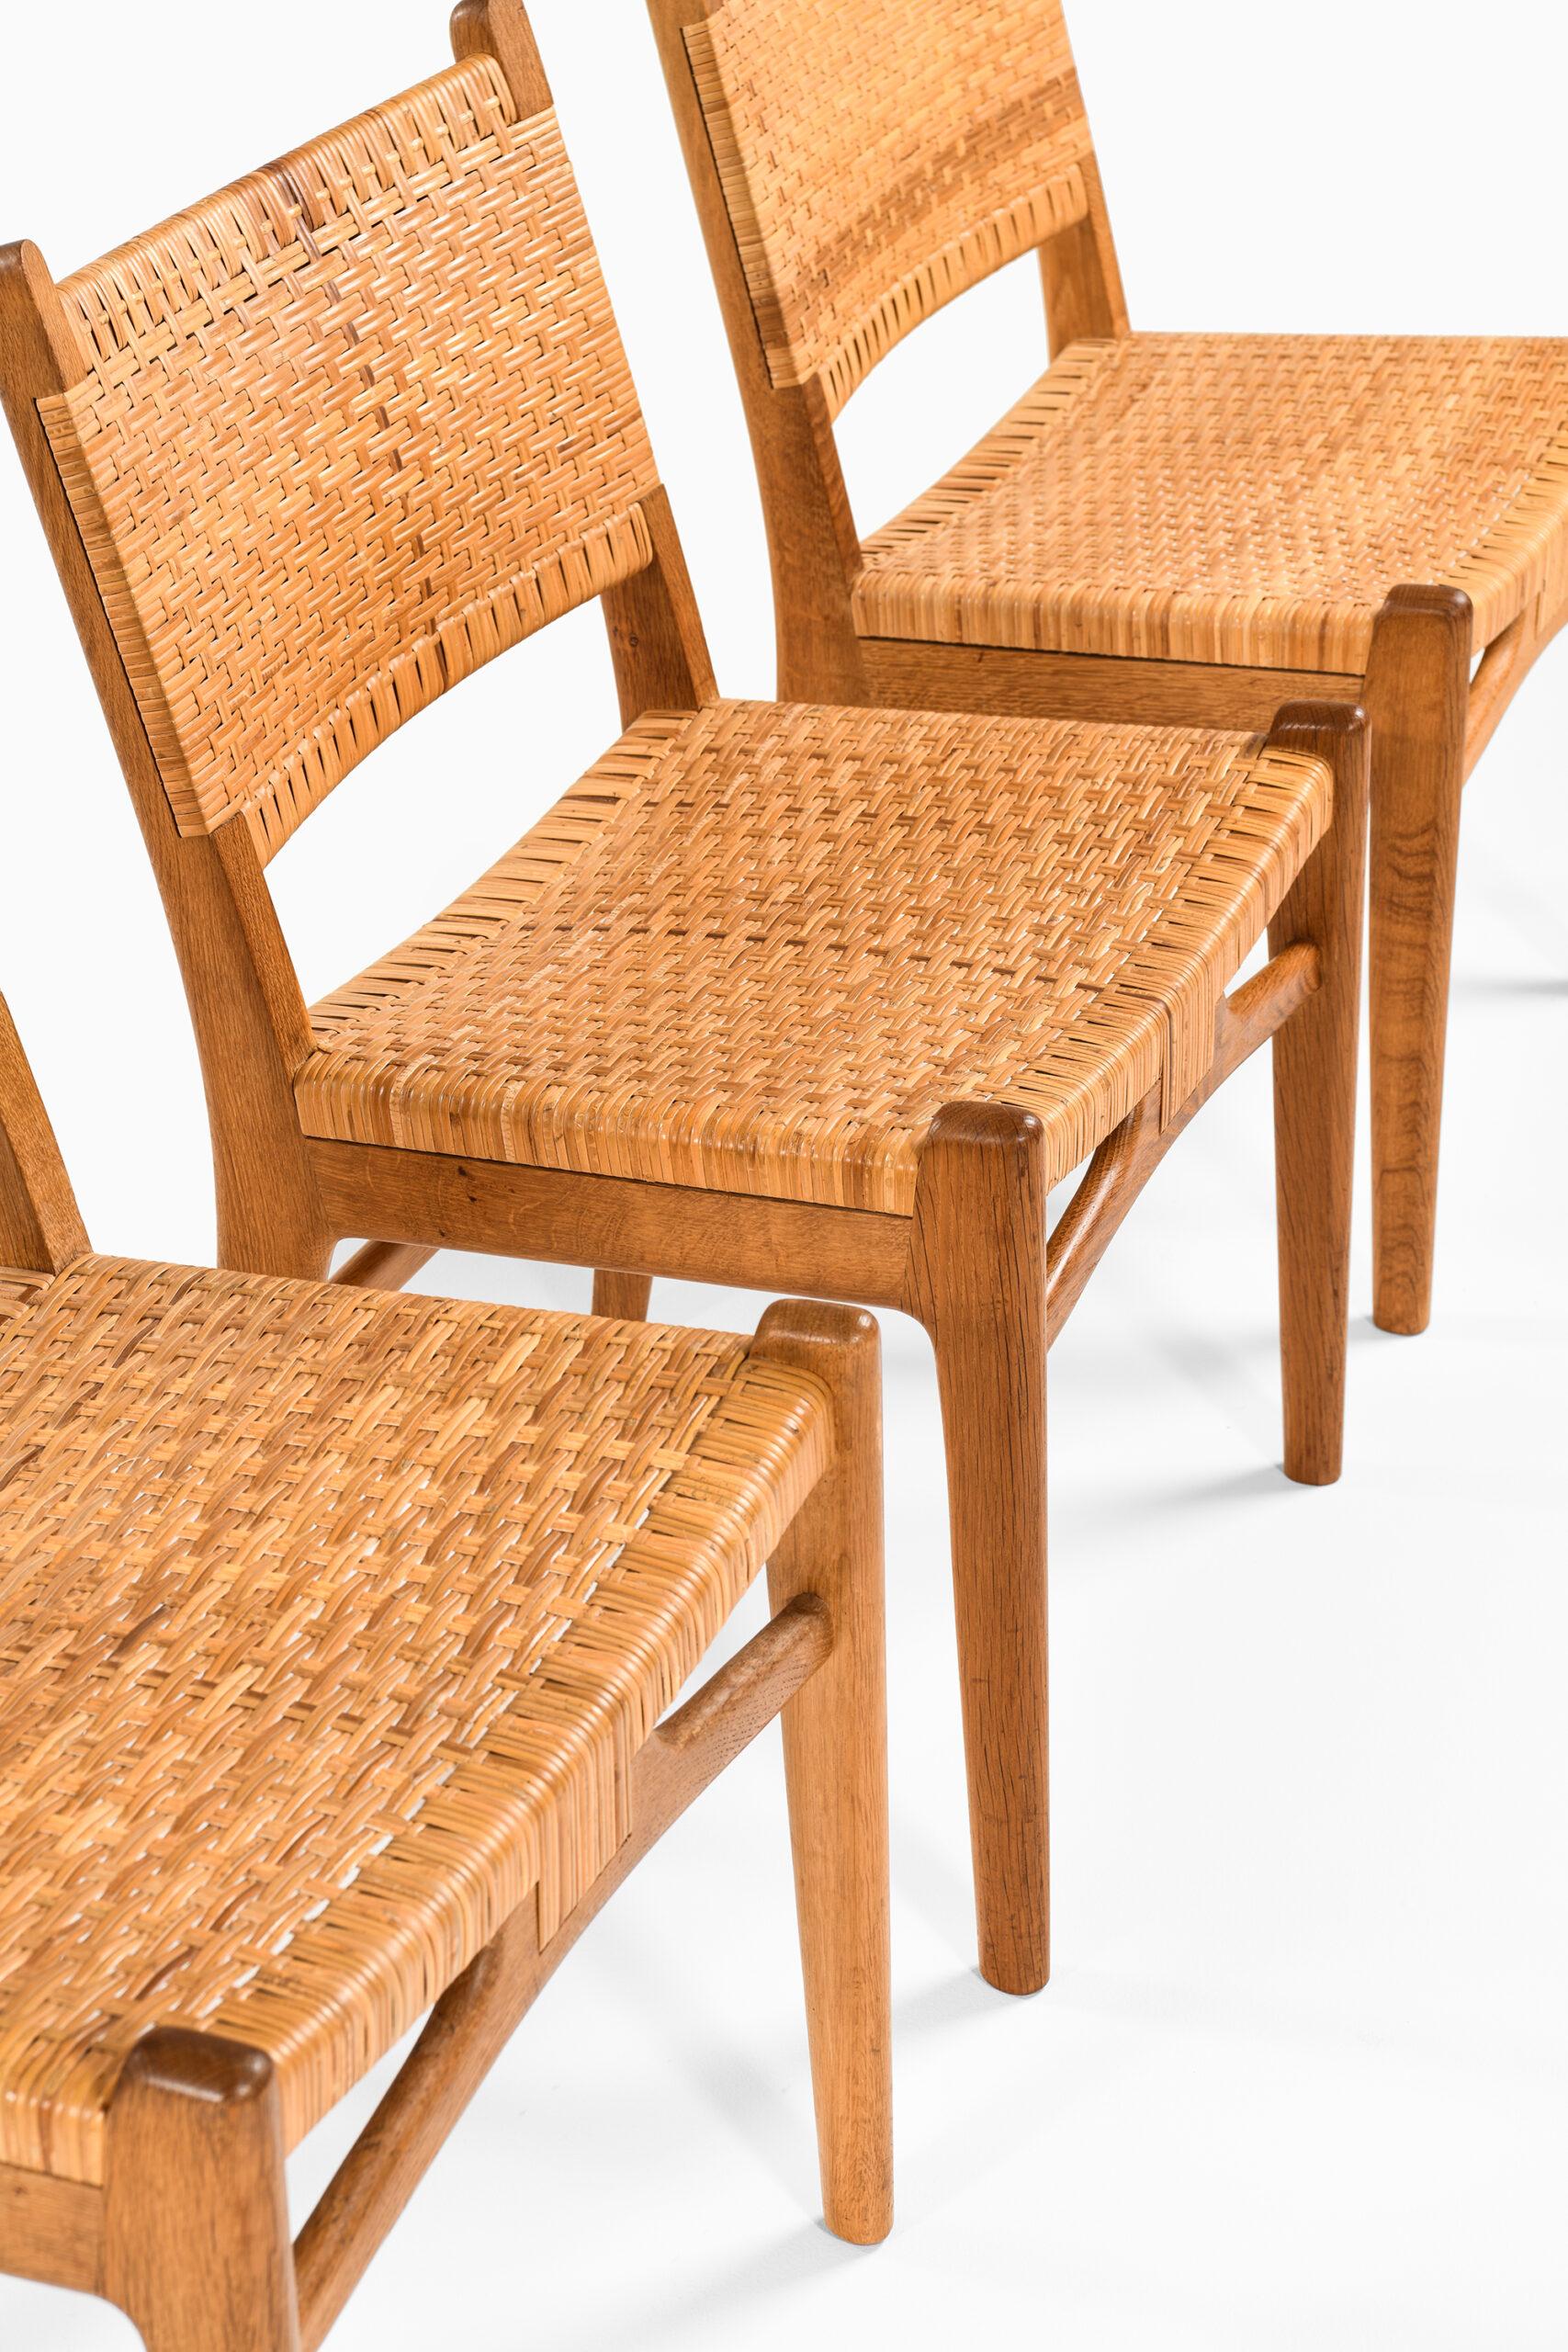 Very rare dining chairs model CH-31 designed by Hans Wegner. Produced by Carl Hansen & Son in Denmark.